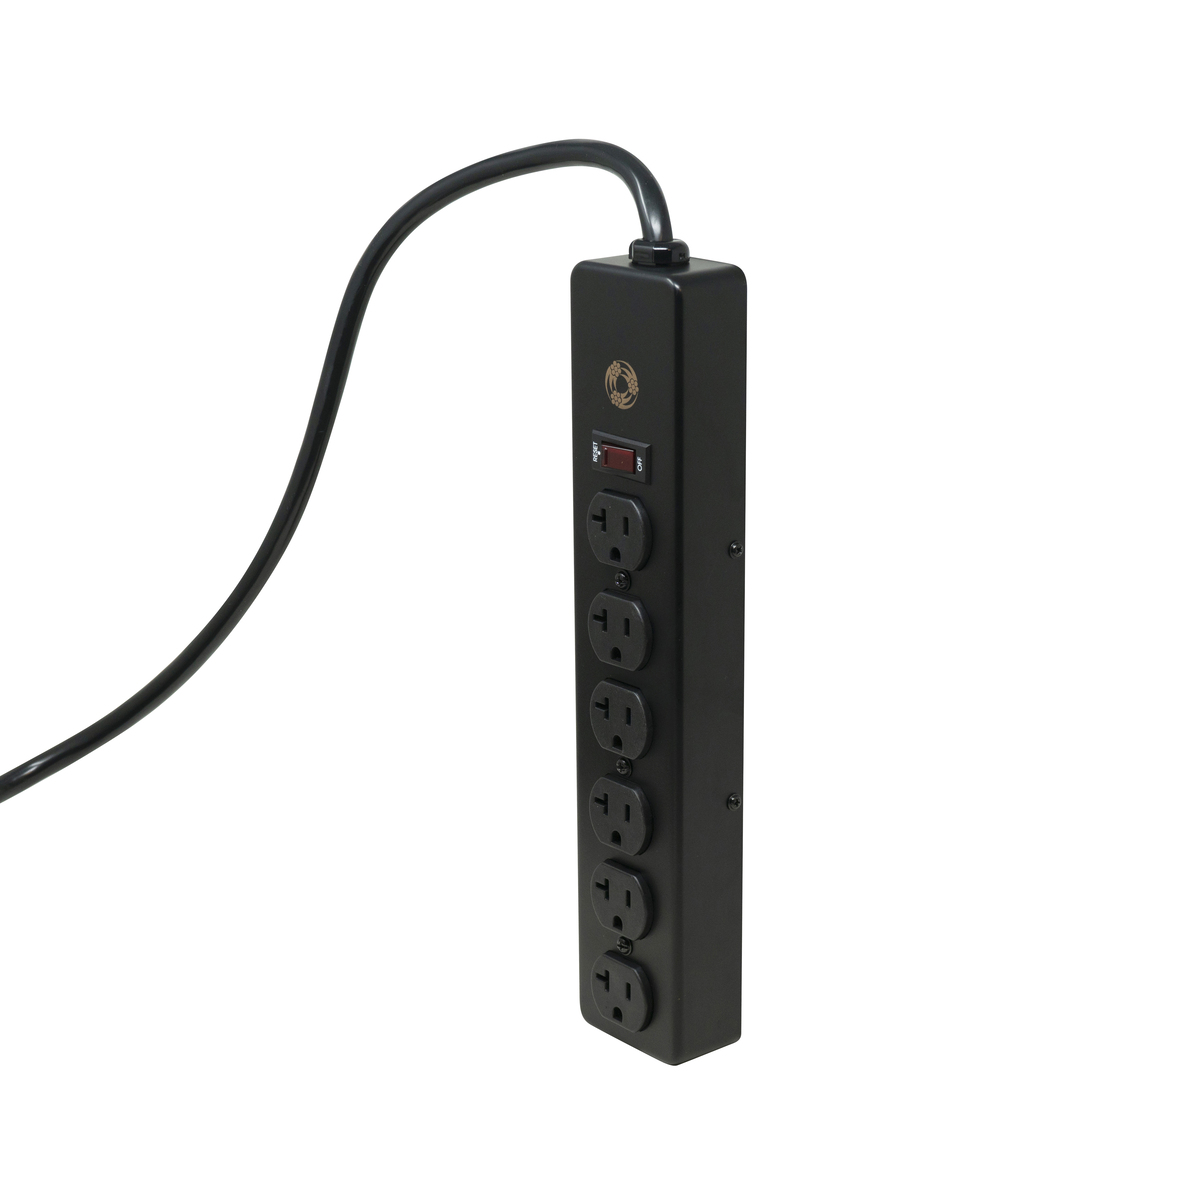 All-Metal, Heavy-Duty 20 Amp Power Strip with NEMA 5-20 Receptacles and Plug, 6 Ft 12/3 SJT cord